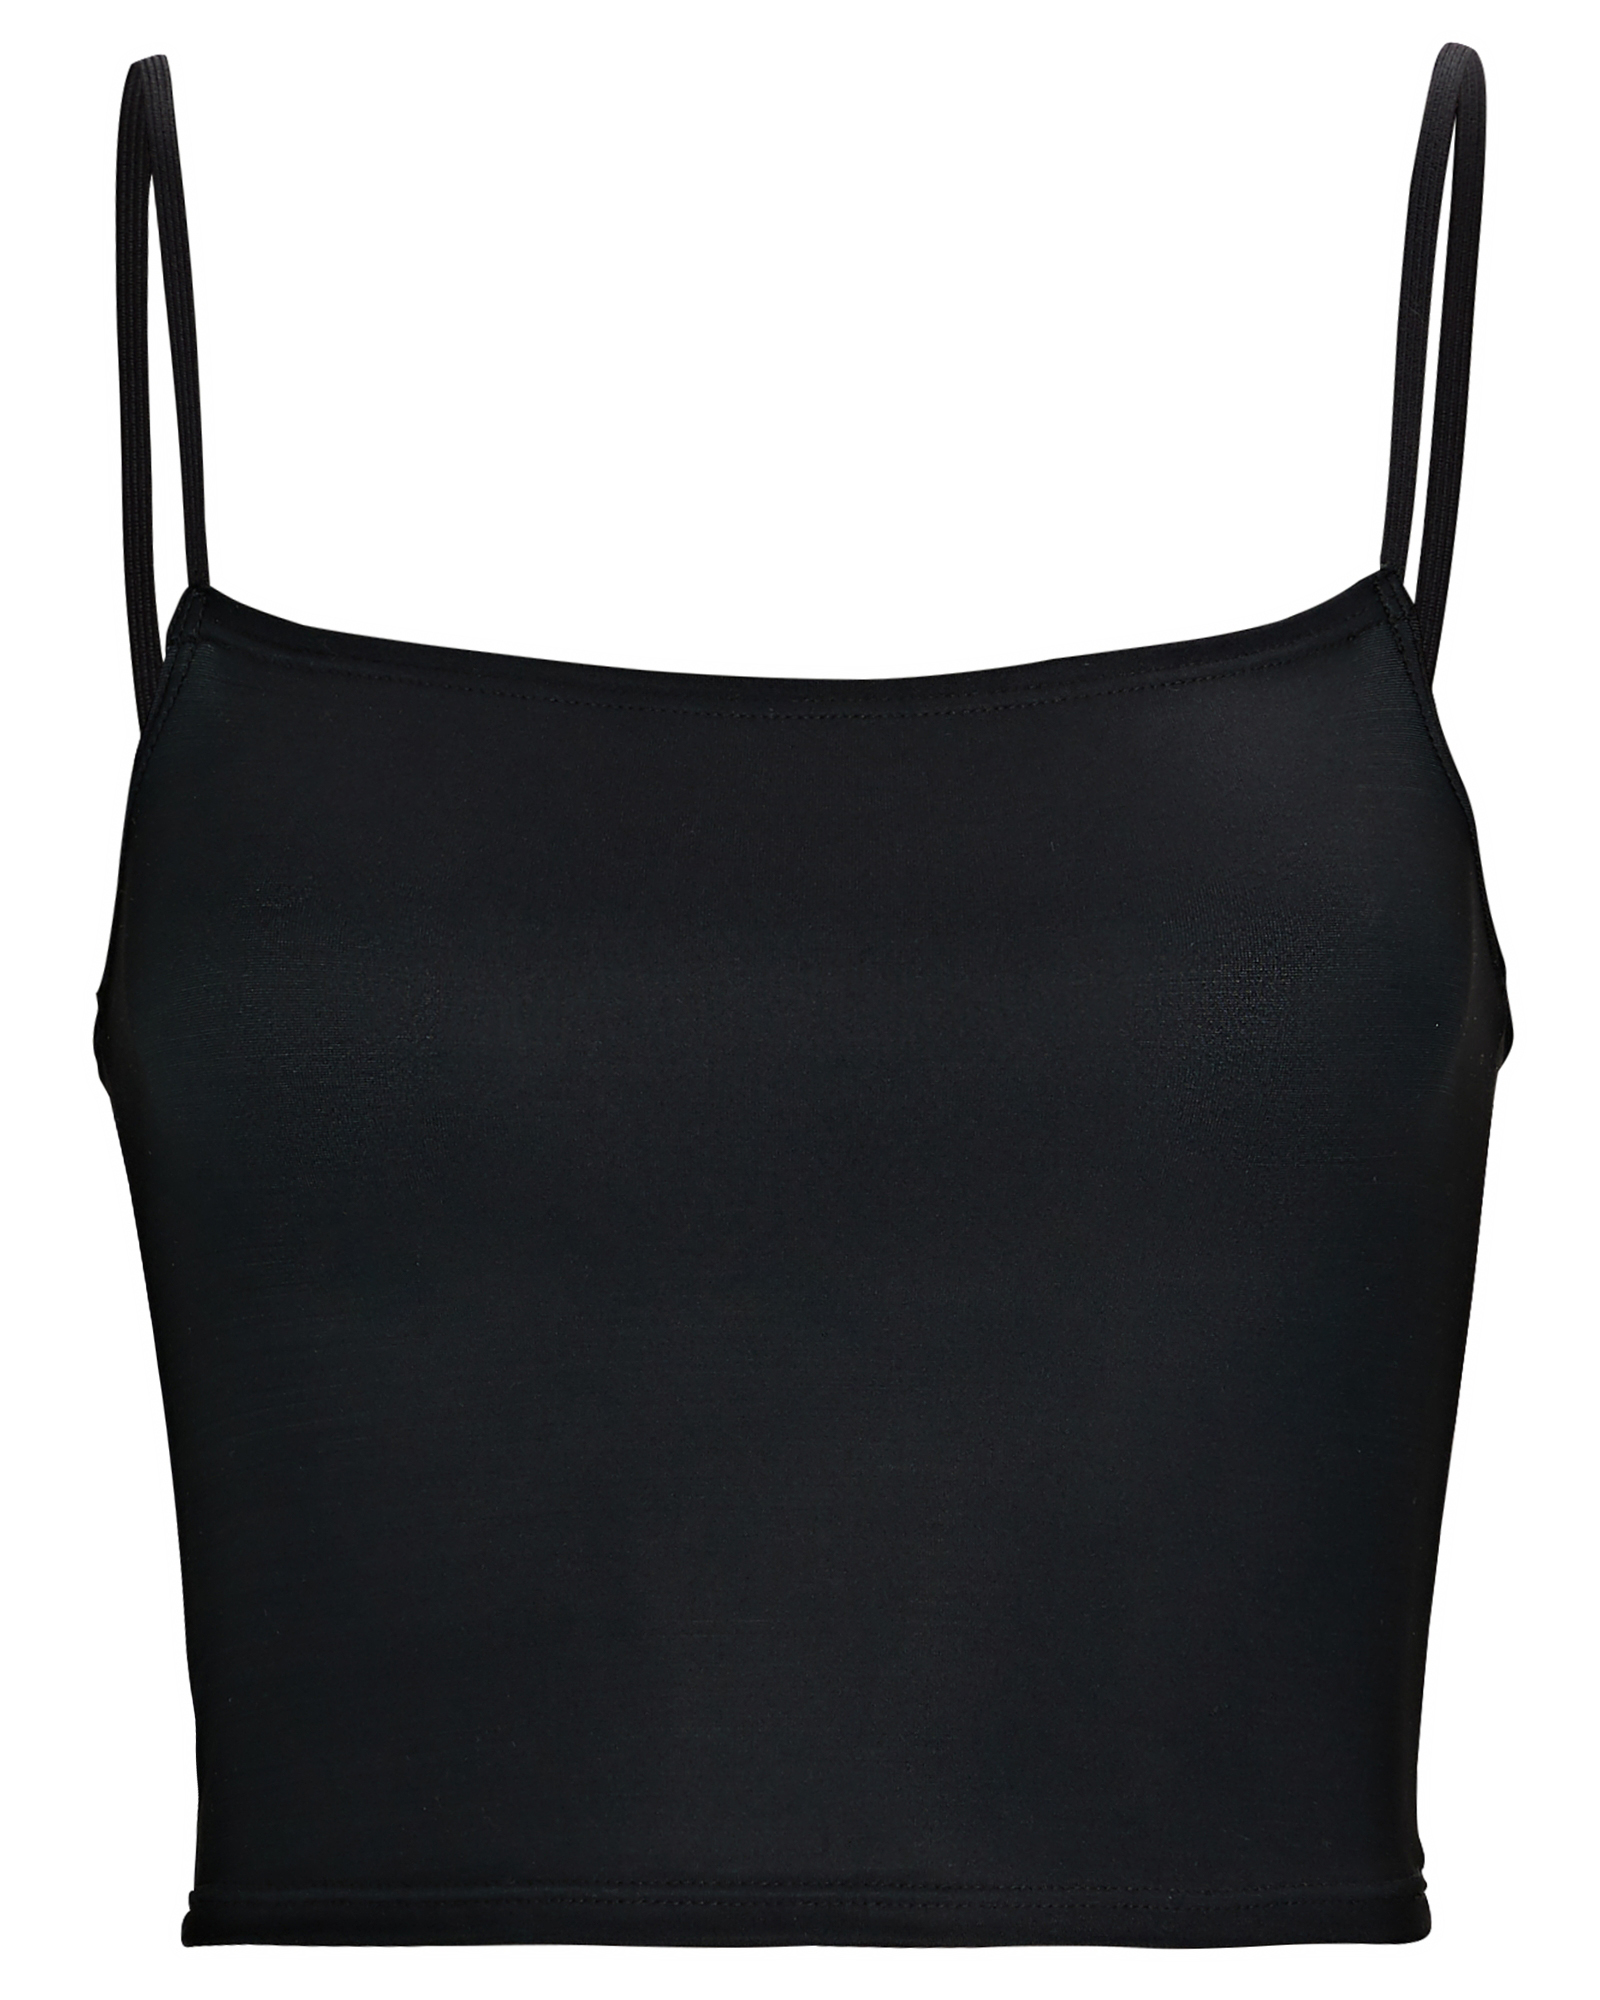 Only Hearts Second Skin Cropped Camisole | INTERMIX®